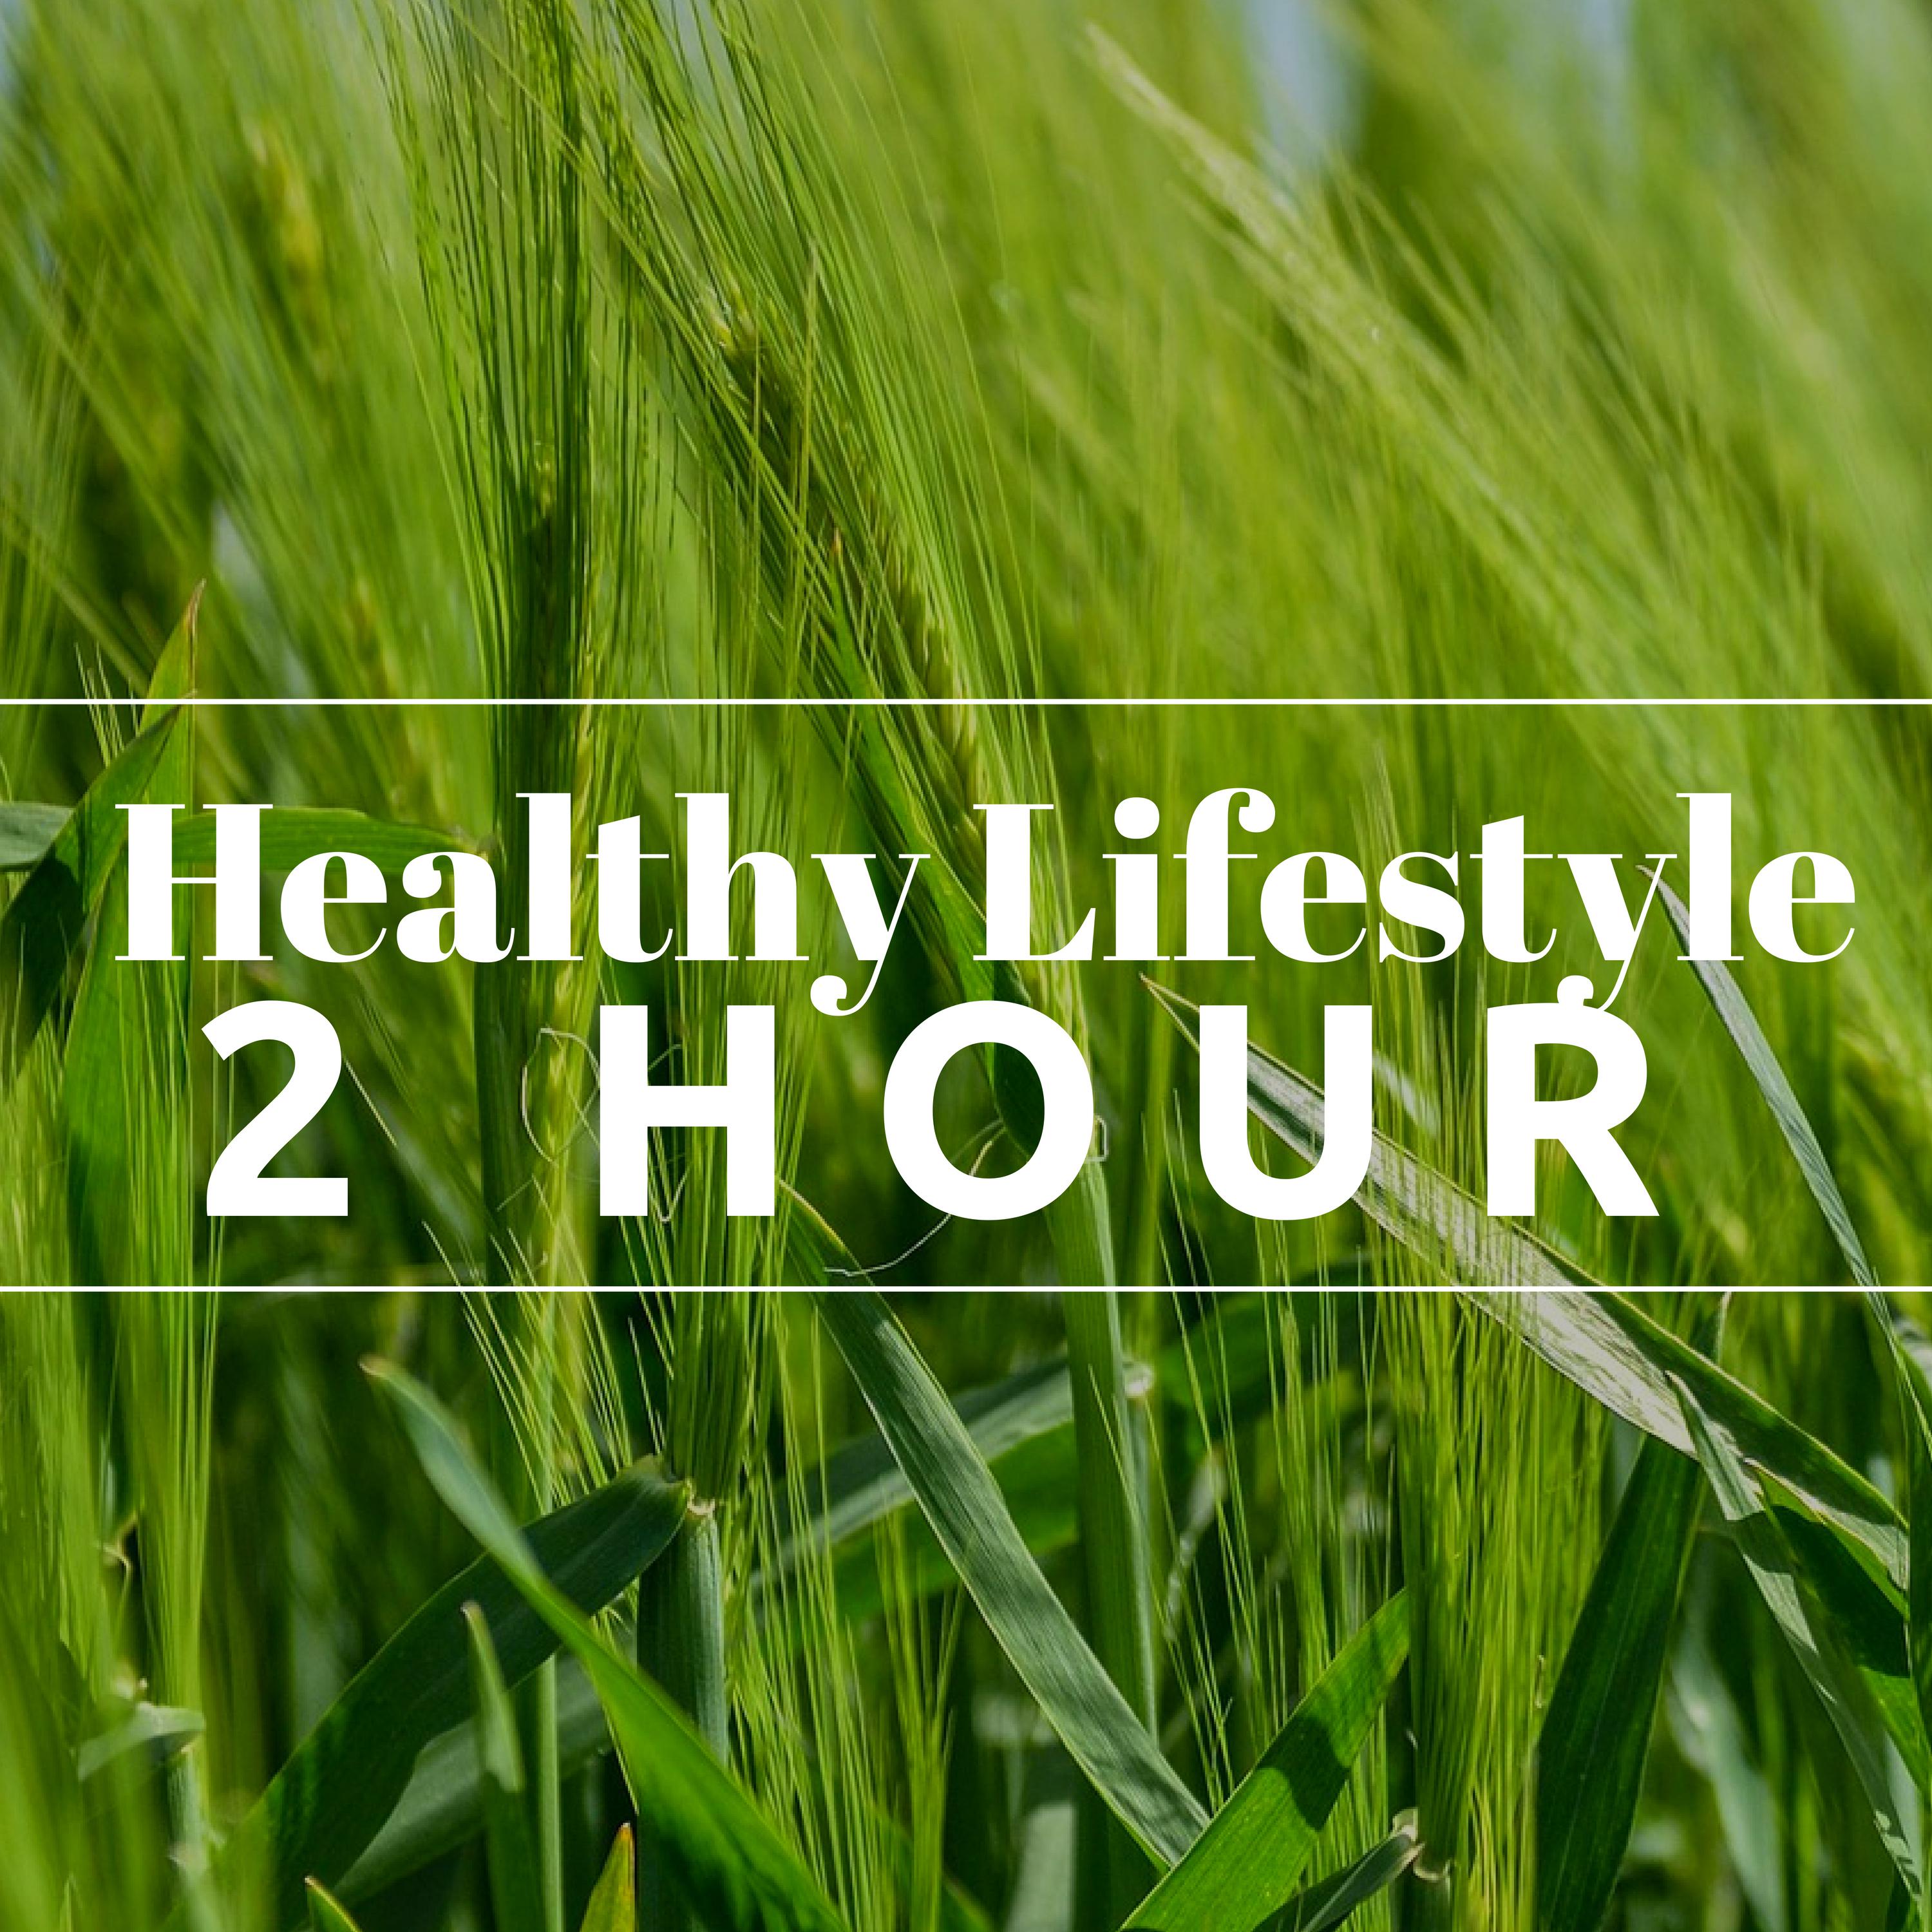 2 HOURS of Healthy Lifestyle - Stress management